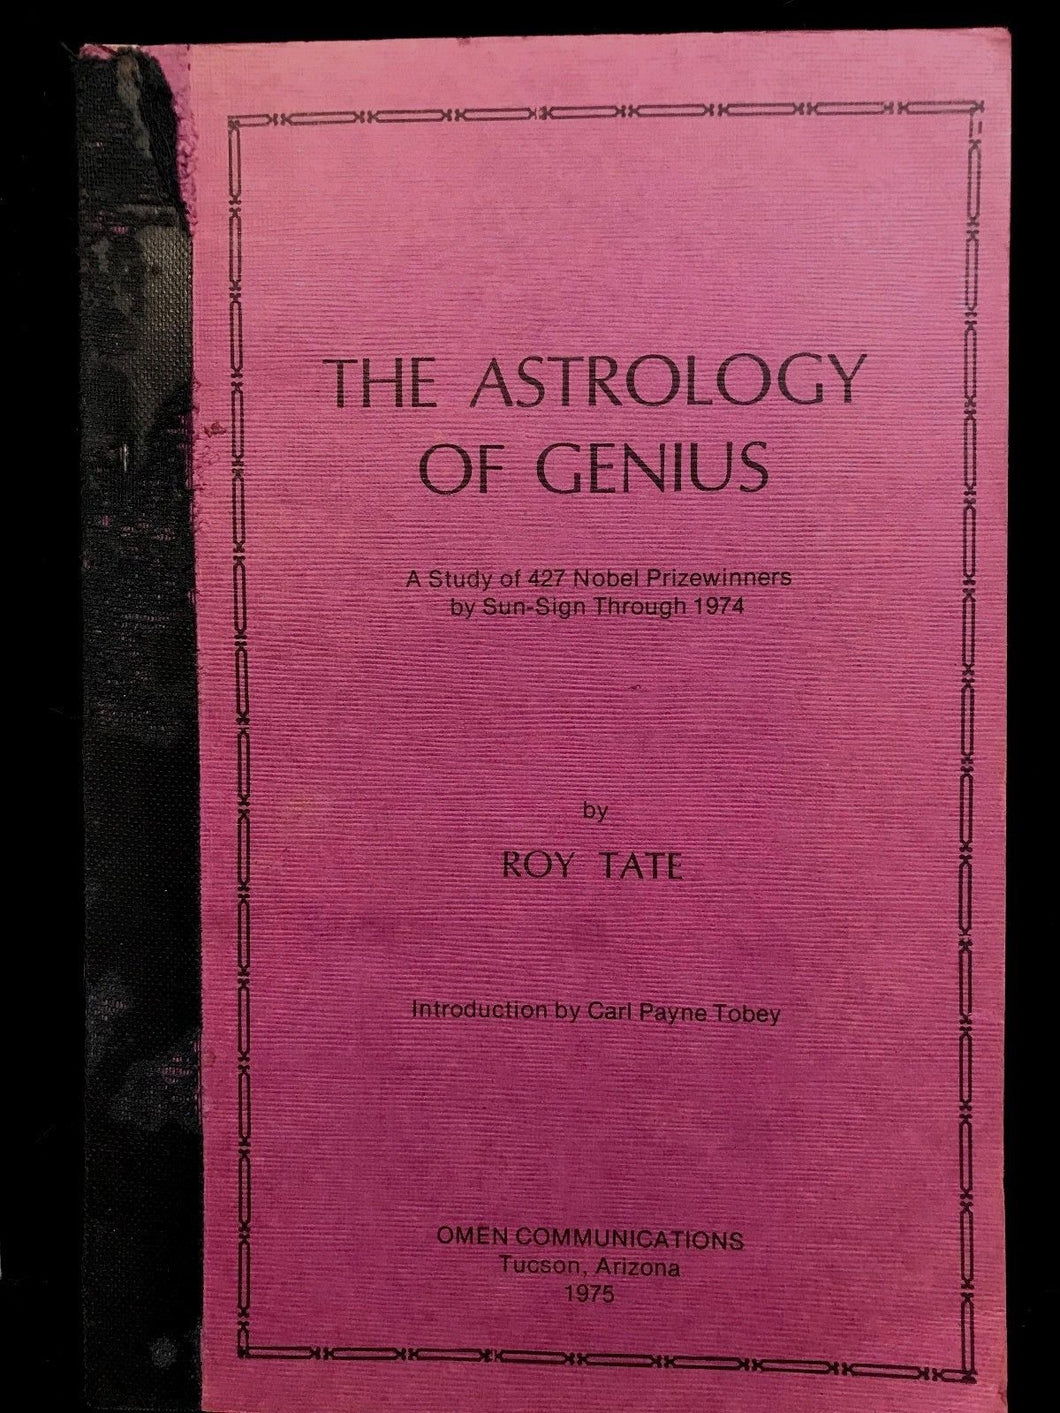 THE ASTROLOGY OF GENIUS: A Study of the Nobel Prizewinners - Tate, 1st Ed 1975